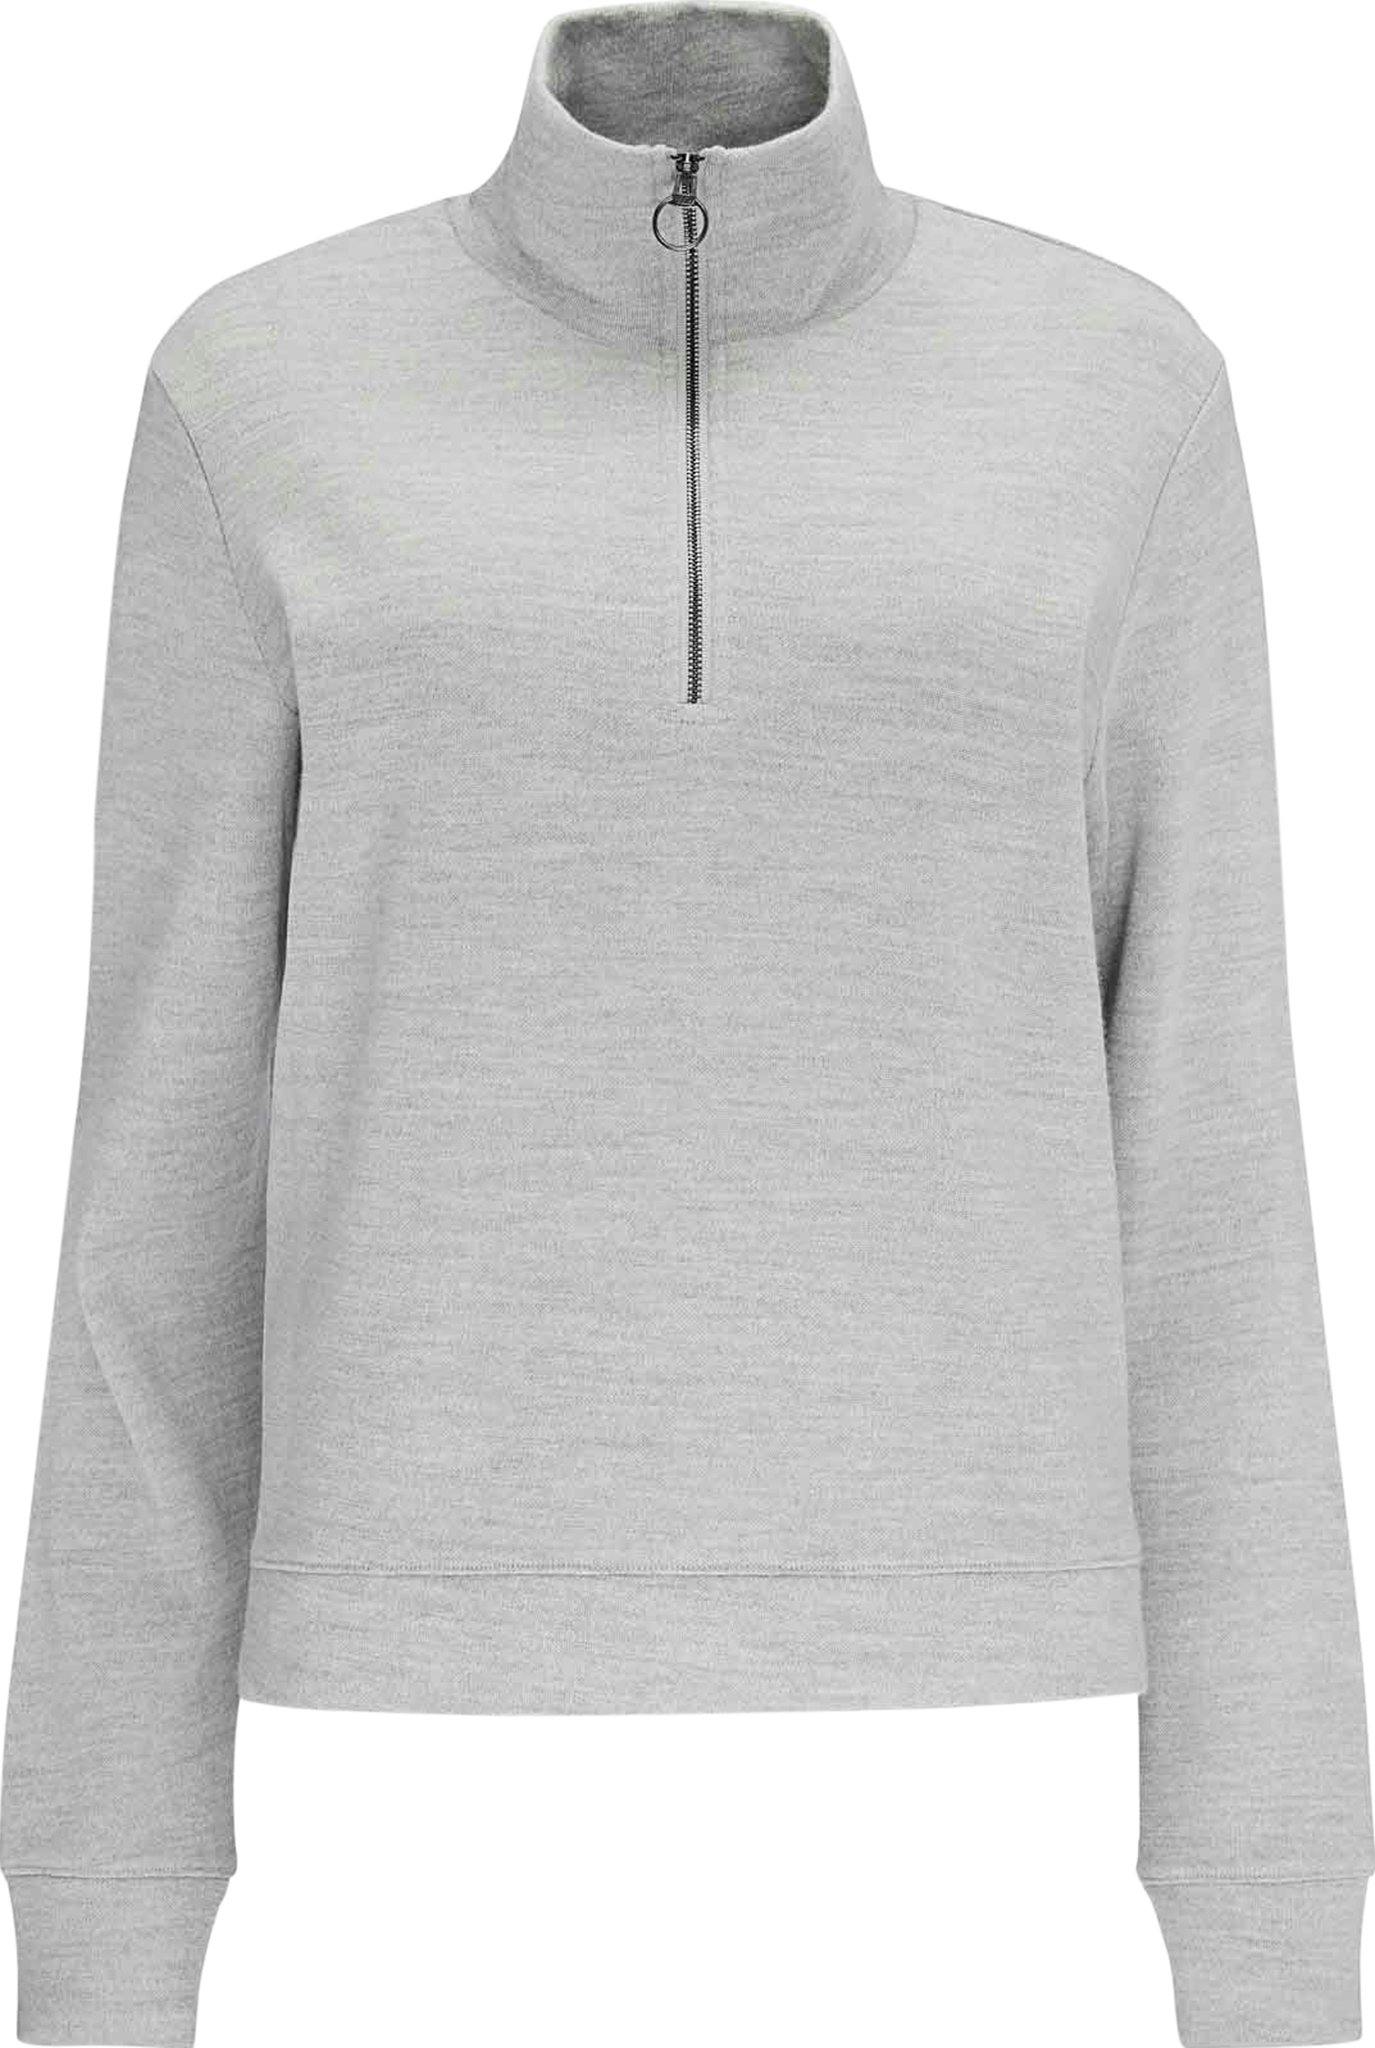 Product image for Tind Zip Up Sweater - Women's